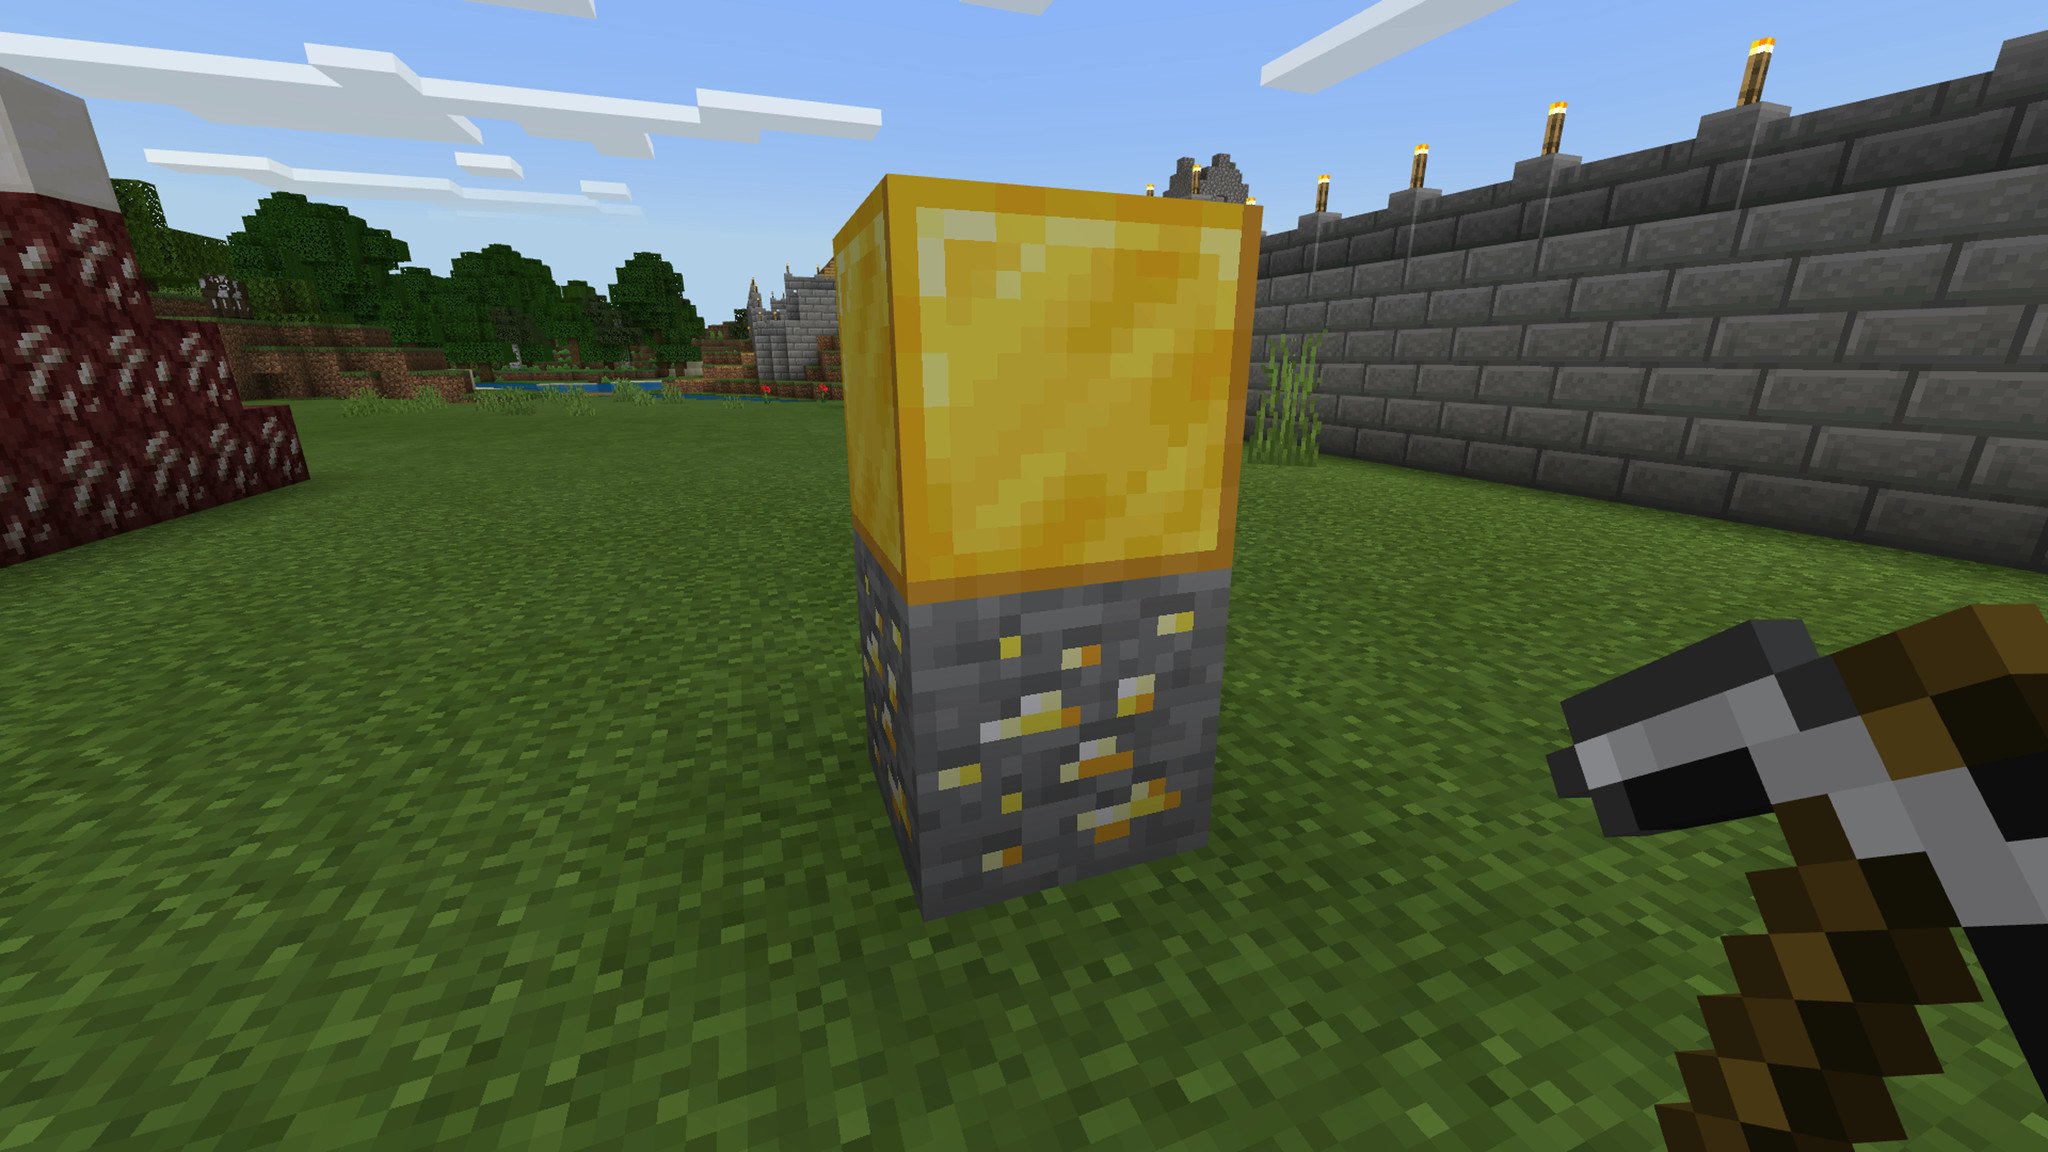 Some gold ore and a gold block